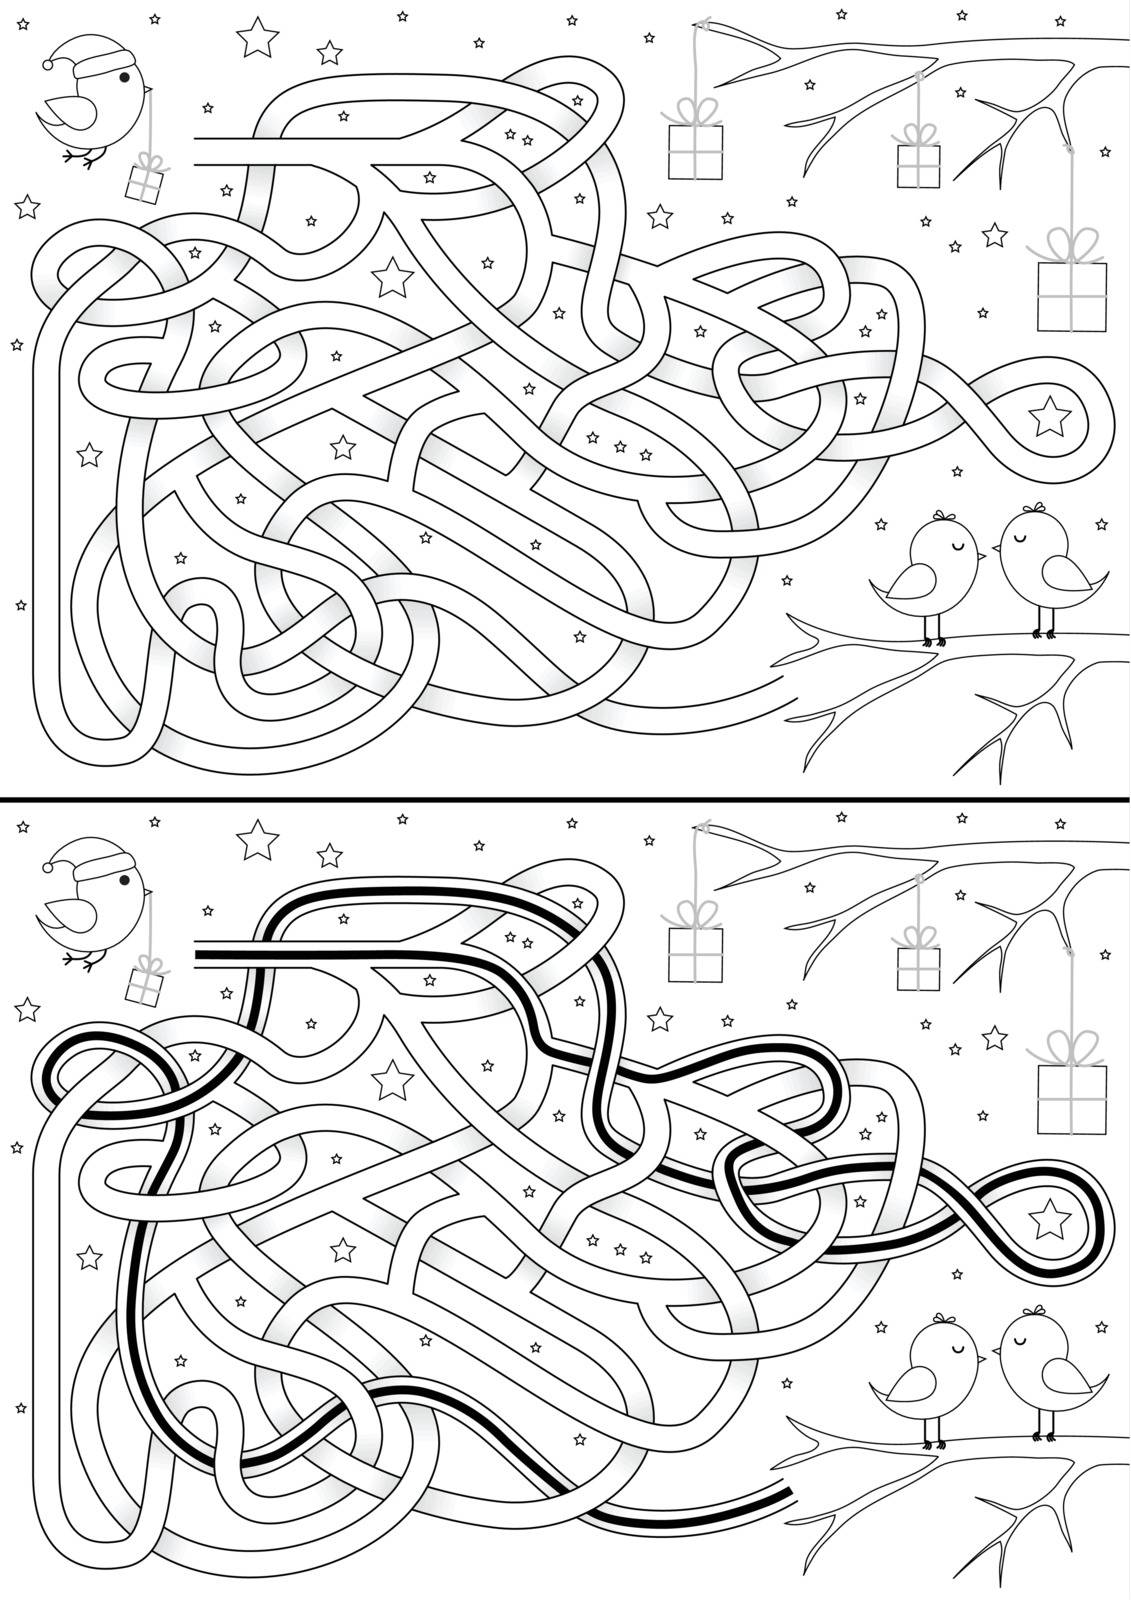 Christmas maze for kids with a solution in black and white